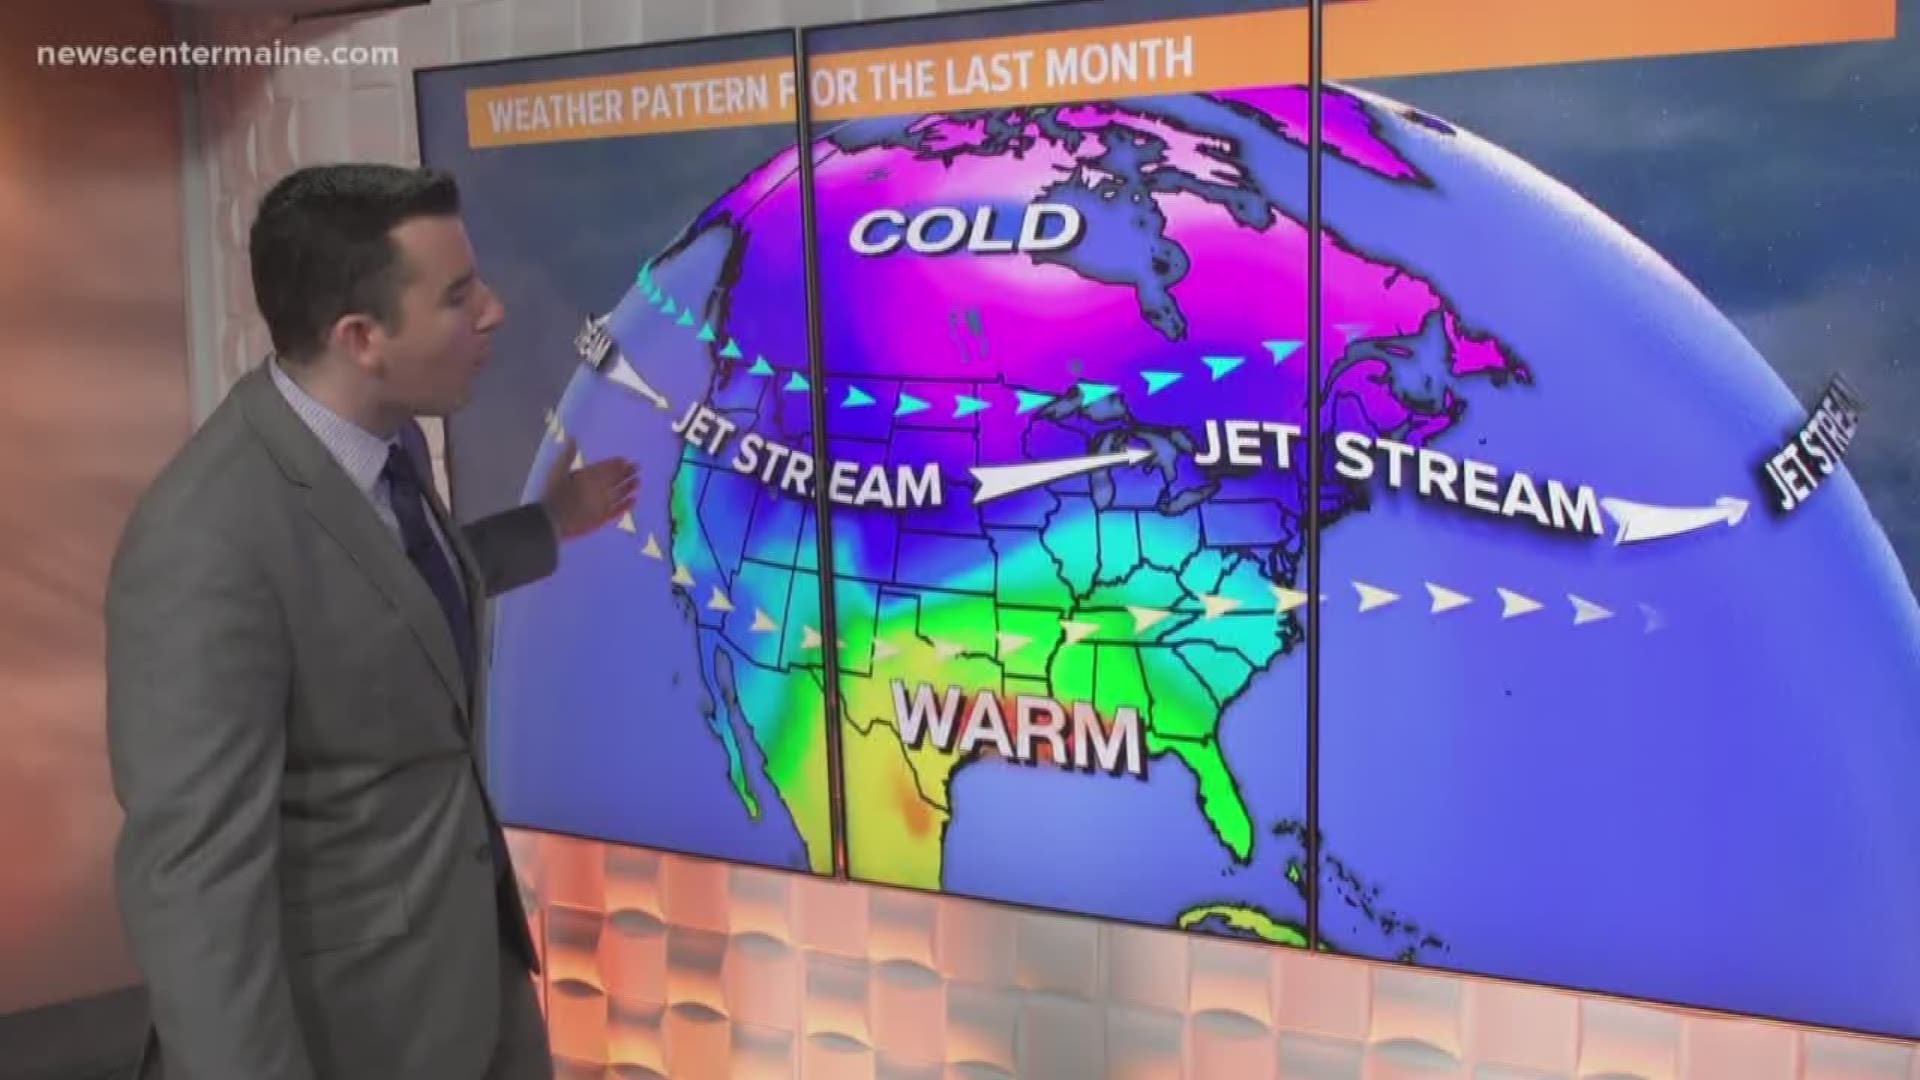 Meteorologist Ryan Breton explains why the last few weeks have been so much warmer than average in the eastern United States, including Maine.